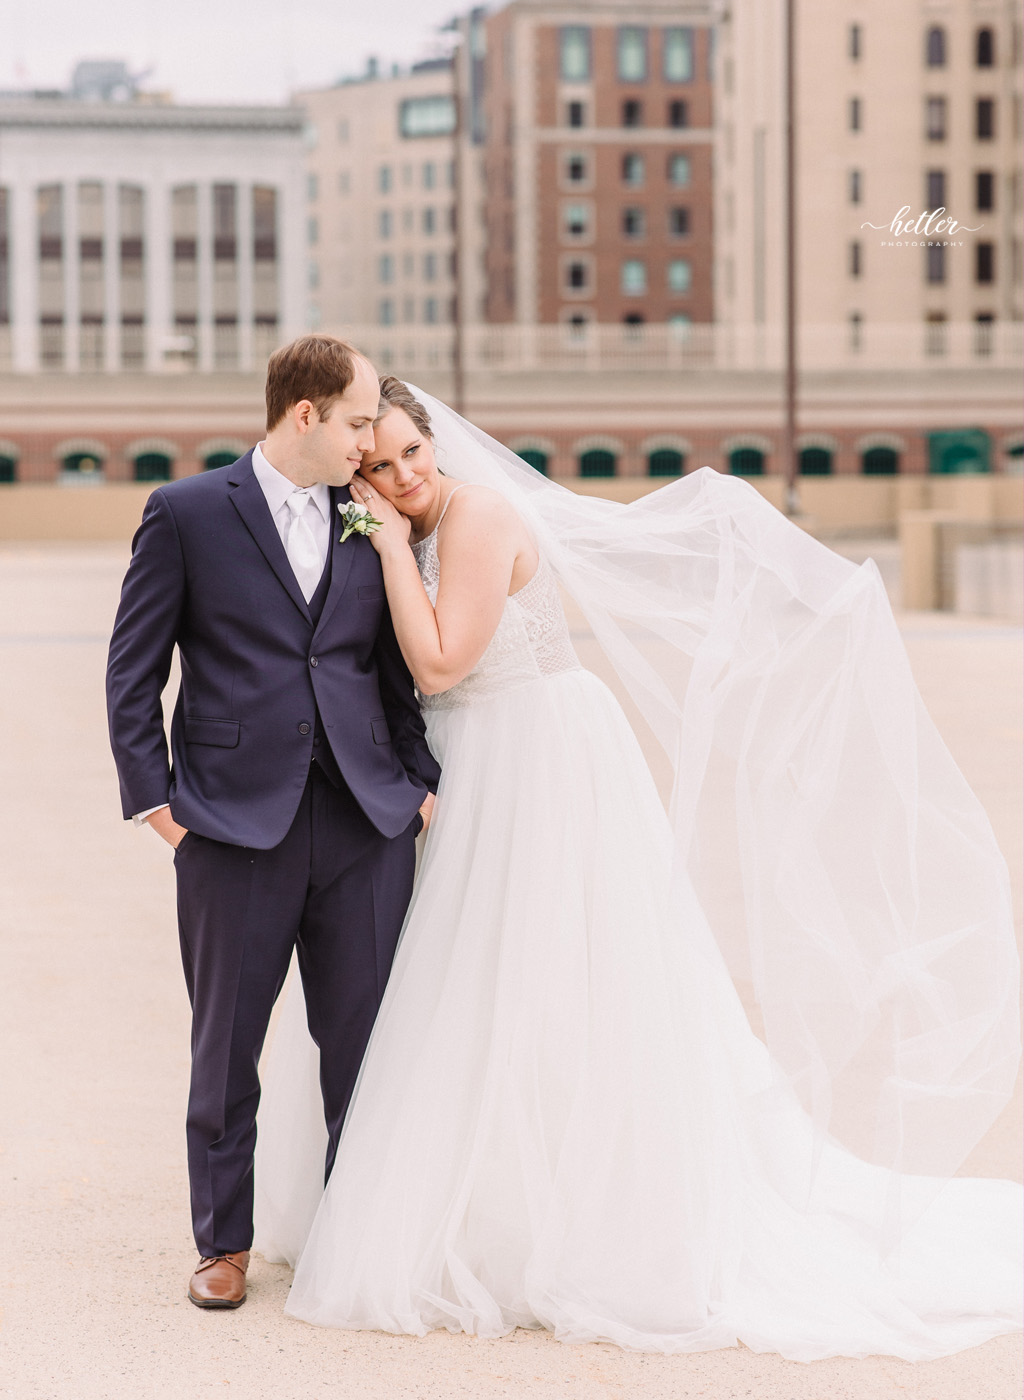 Spring warehouse wedding in downtown Grand Rapids Michigan at Studio D2D with dusty rose and navy colors